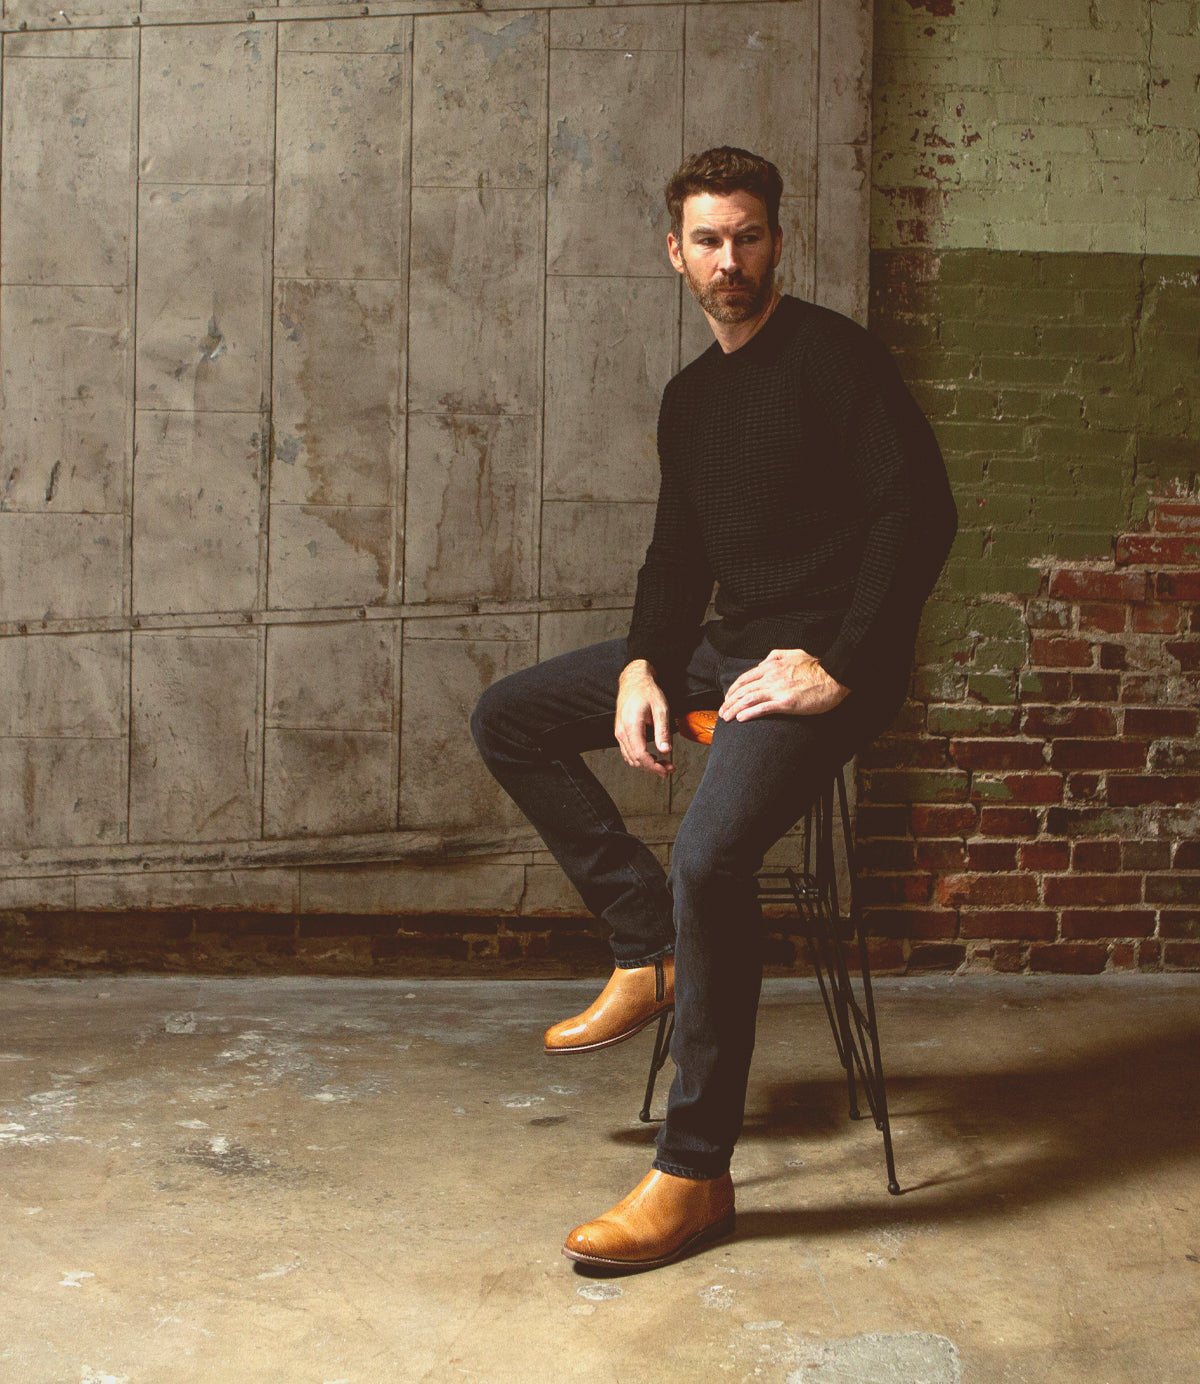 A man in a black sweater and jeans sitting on a stool in a rustic room with exposed brick walls, wearing Bed Stu leather ankle boots.